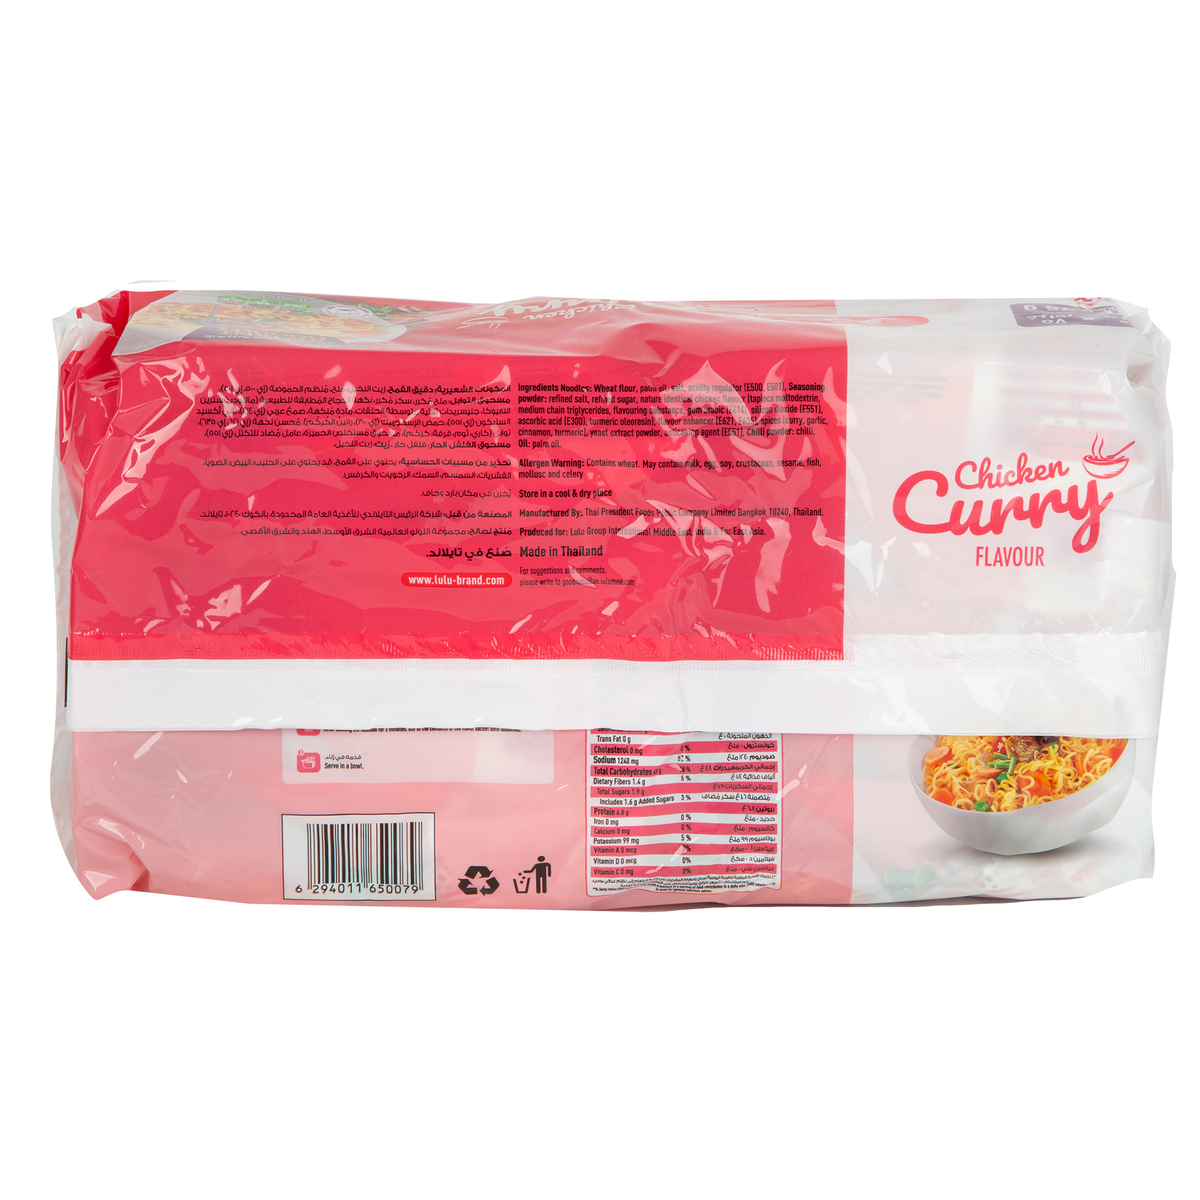 LuLu Instant Noodles Chicken Curry Flavour, 10 x 75 g